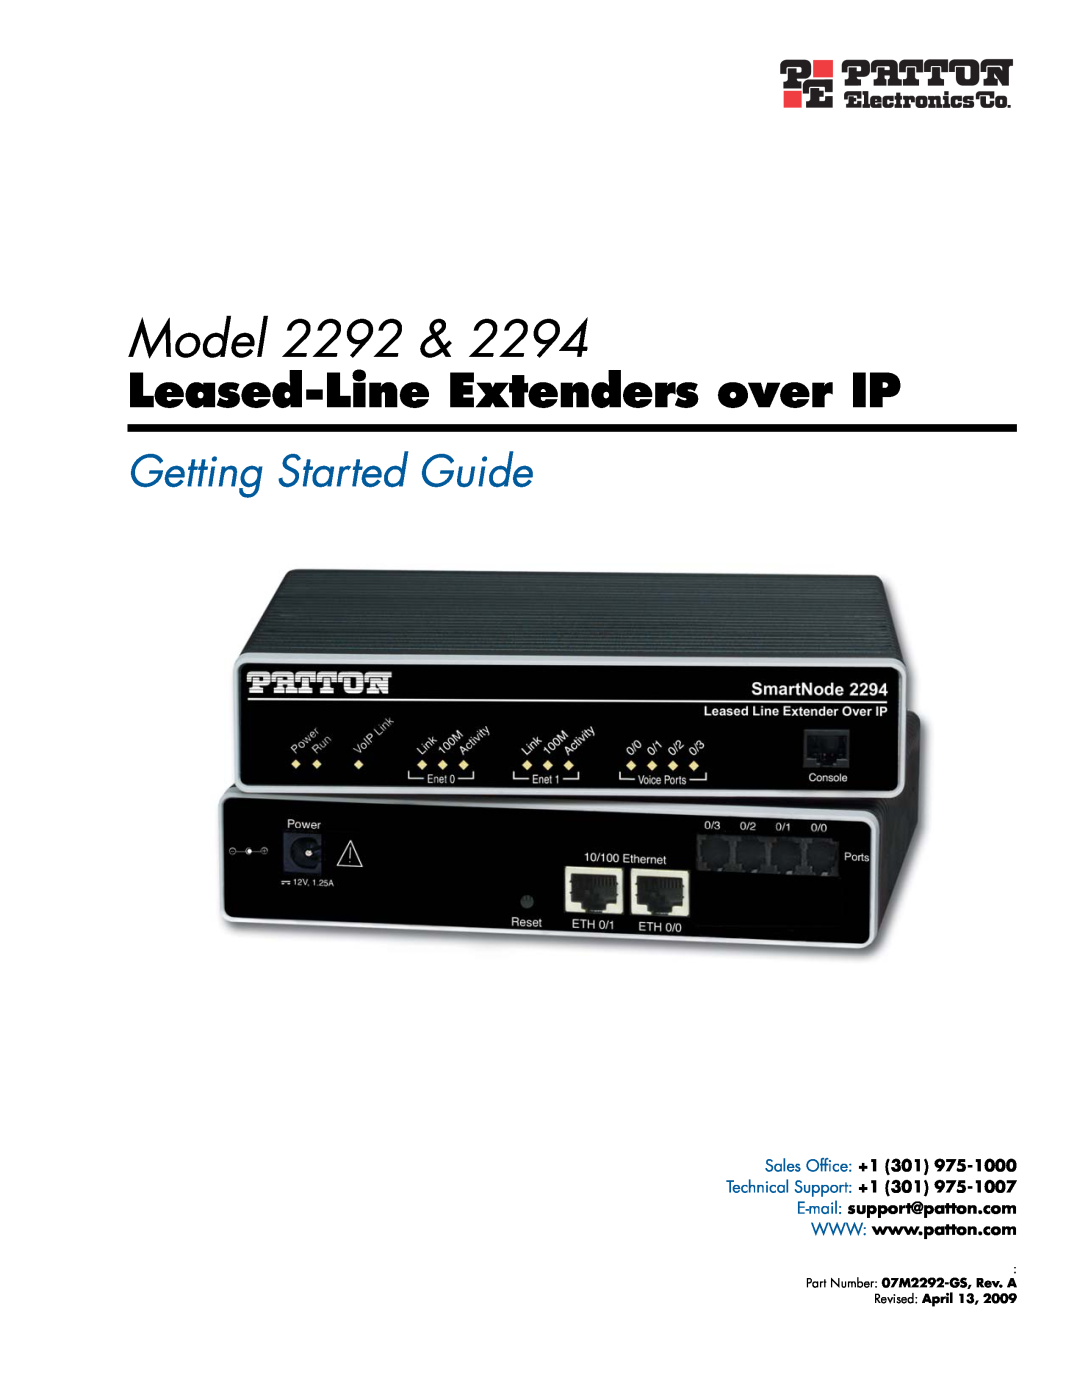 Patton electronic 2294 manual Model 2292, Leased-Line Extenders over IP, Getting Started Guide, Sales Ofﬁce +1 301 